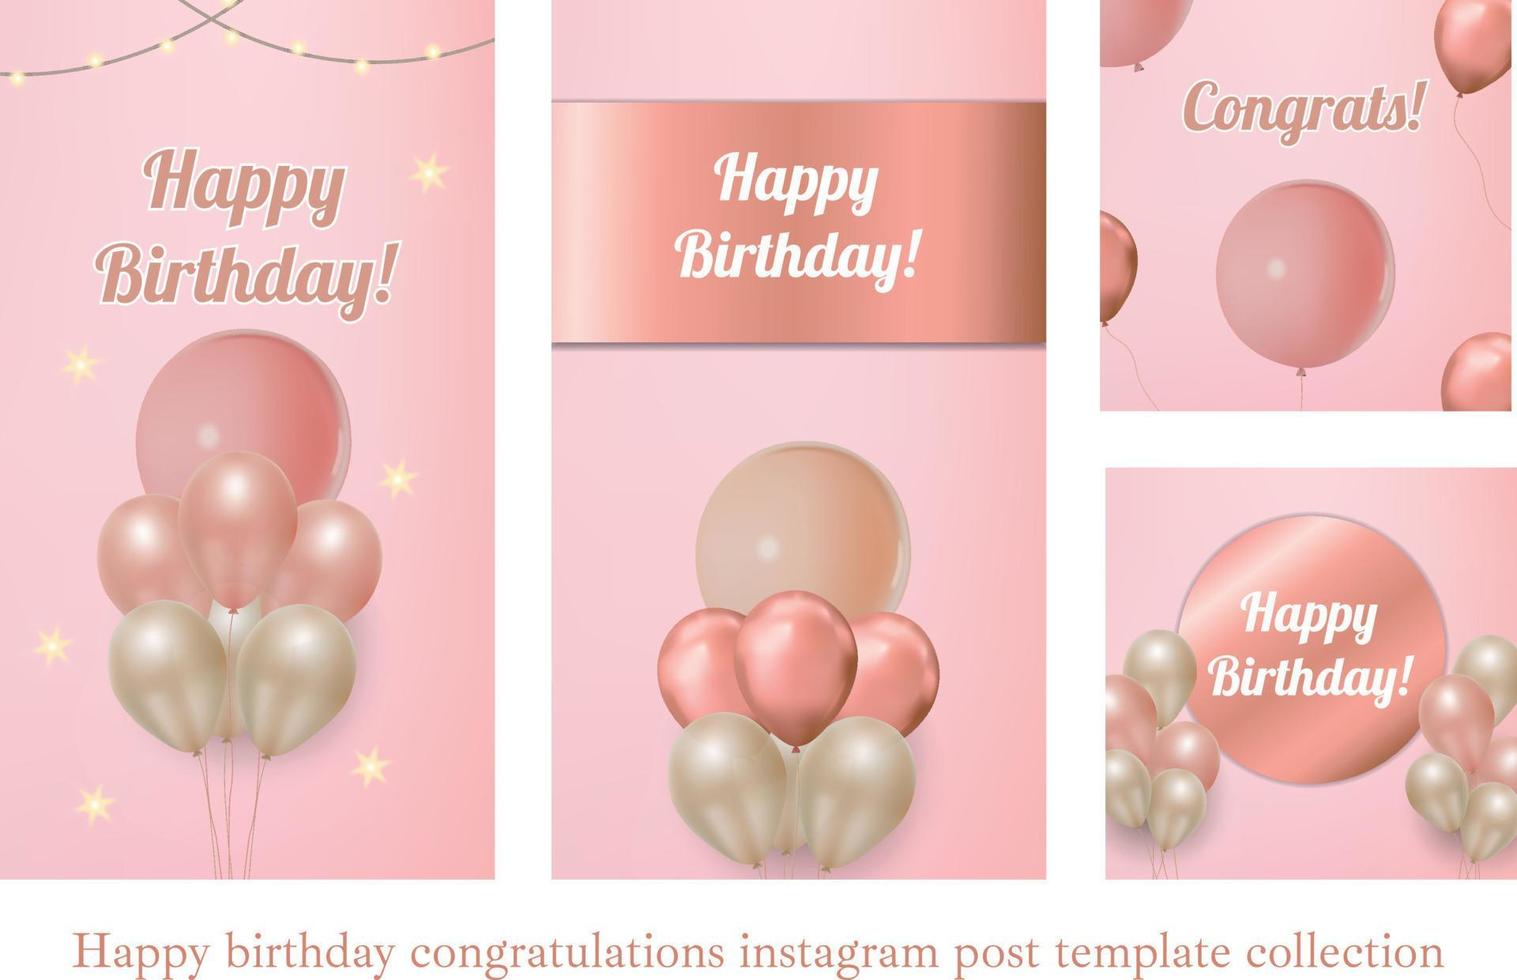 Happy birthday congratulations instagram post template collection with realistic balloons vector